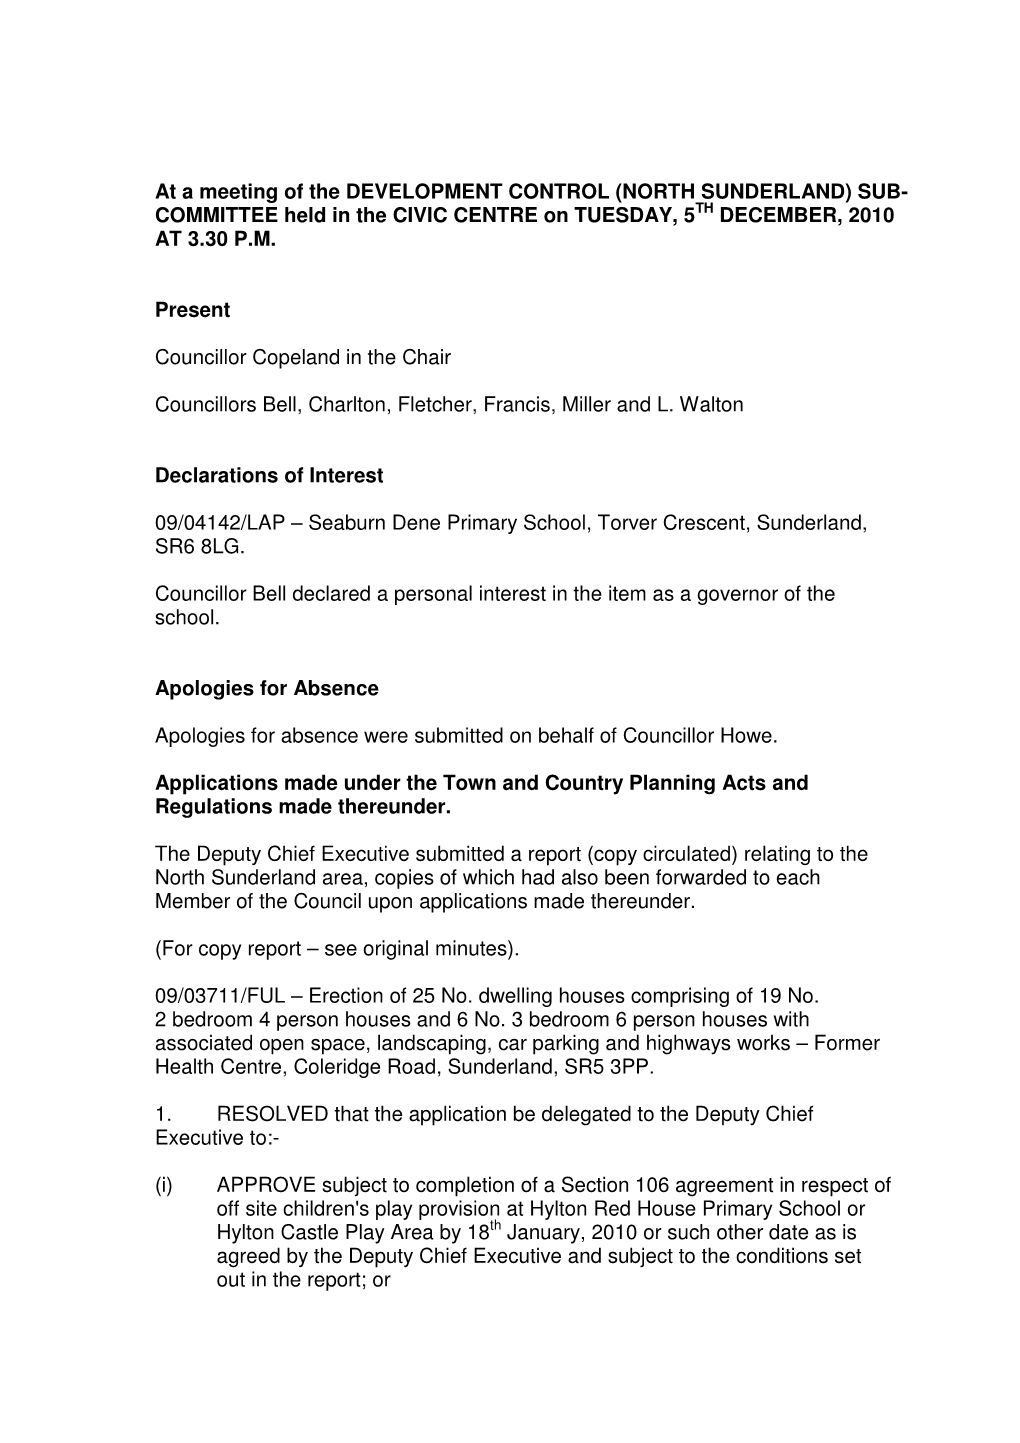 (NORTH SUNDERLAND) SUB- COMMITTEE Held in the CIVIC CENTRE on TUESDAY, 5TH DECEMBER, 2010 at 3.30 P.M